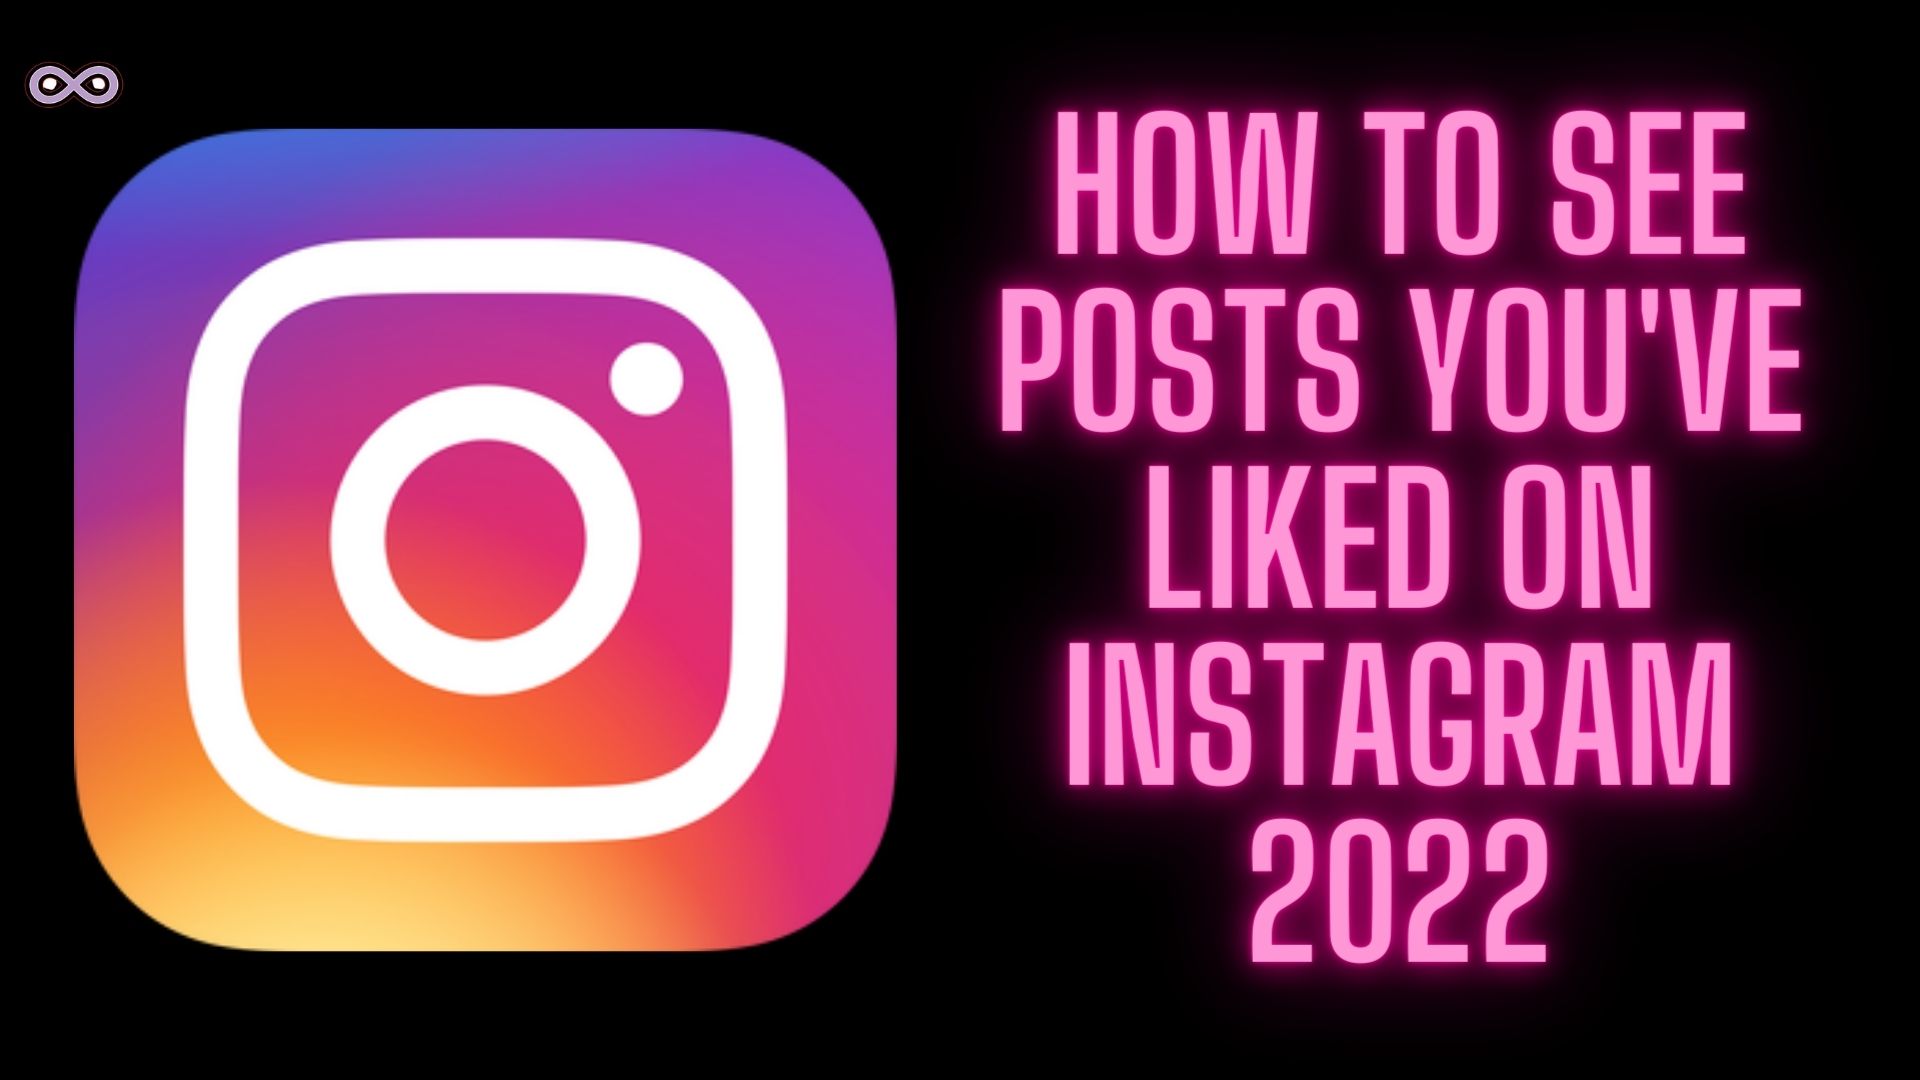 How to see posts you've liked on Instagram 2022 on All devices - Aspartin